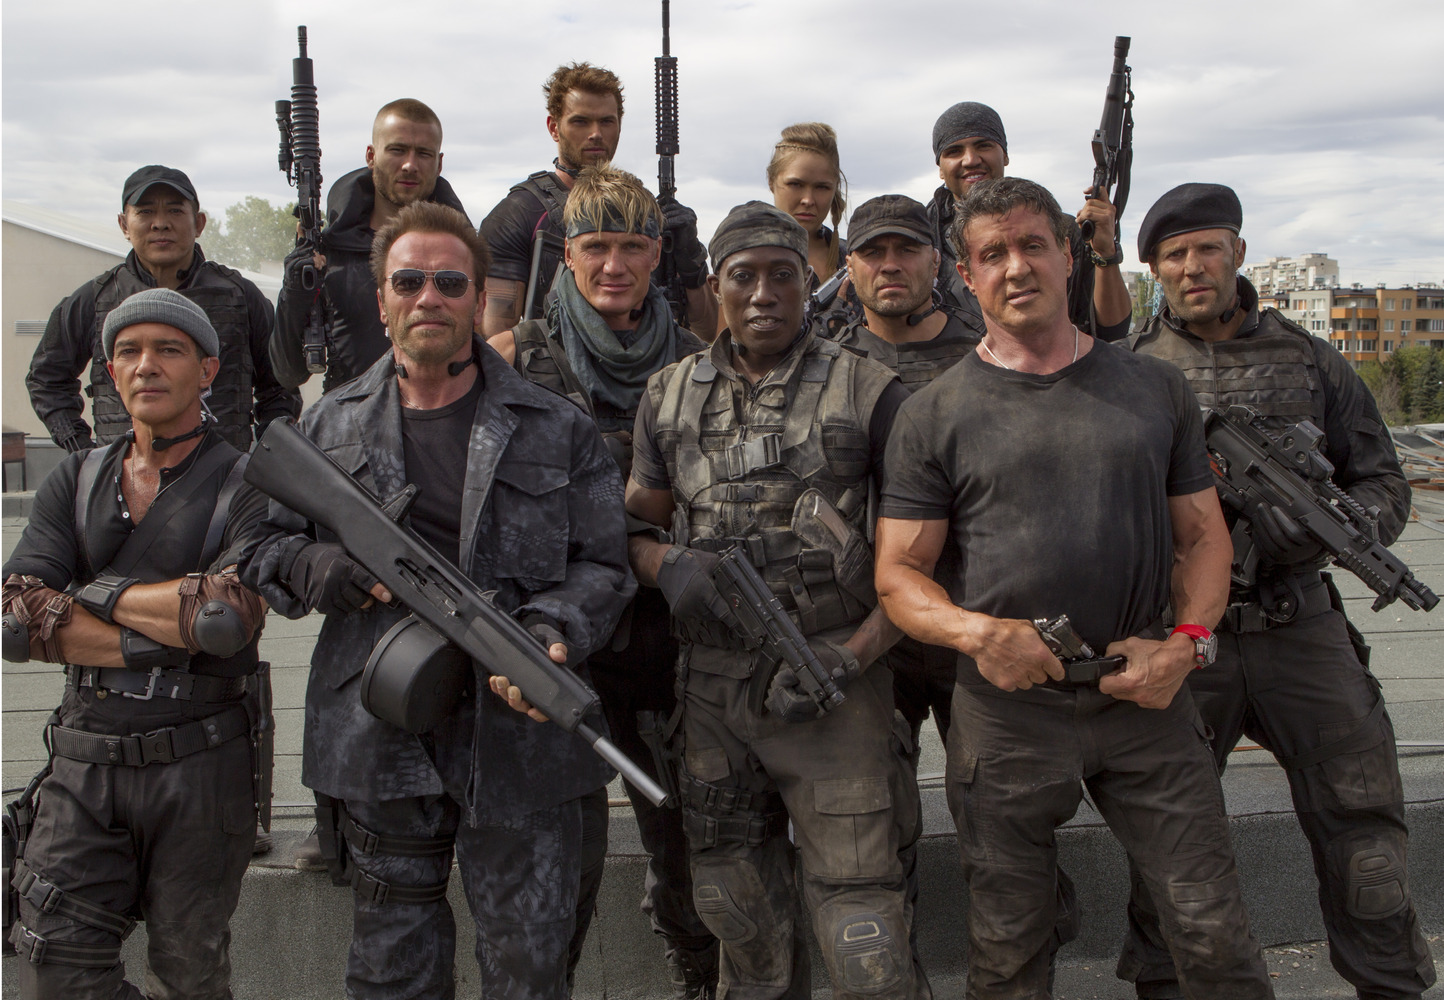 expendables-3-the-expendables-3-20-08-2014-34-g.jpg